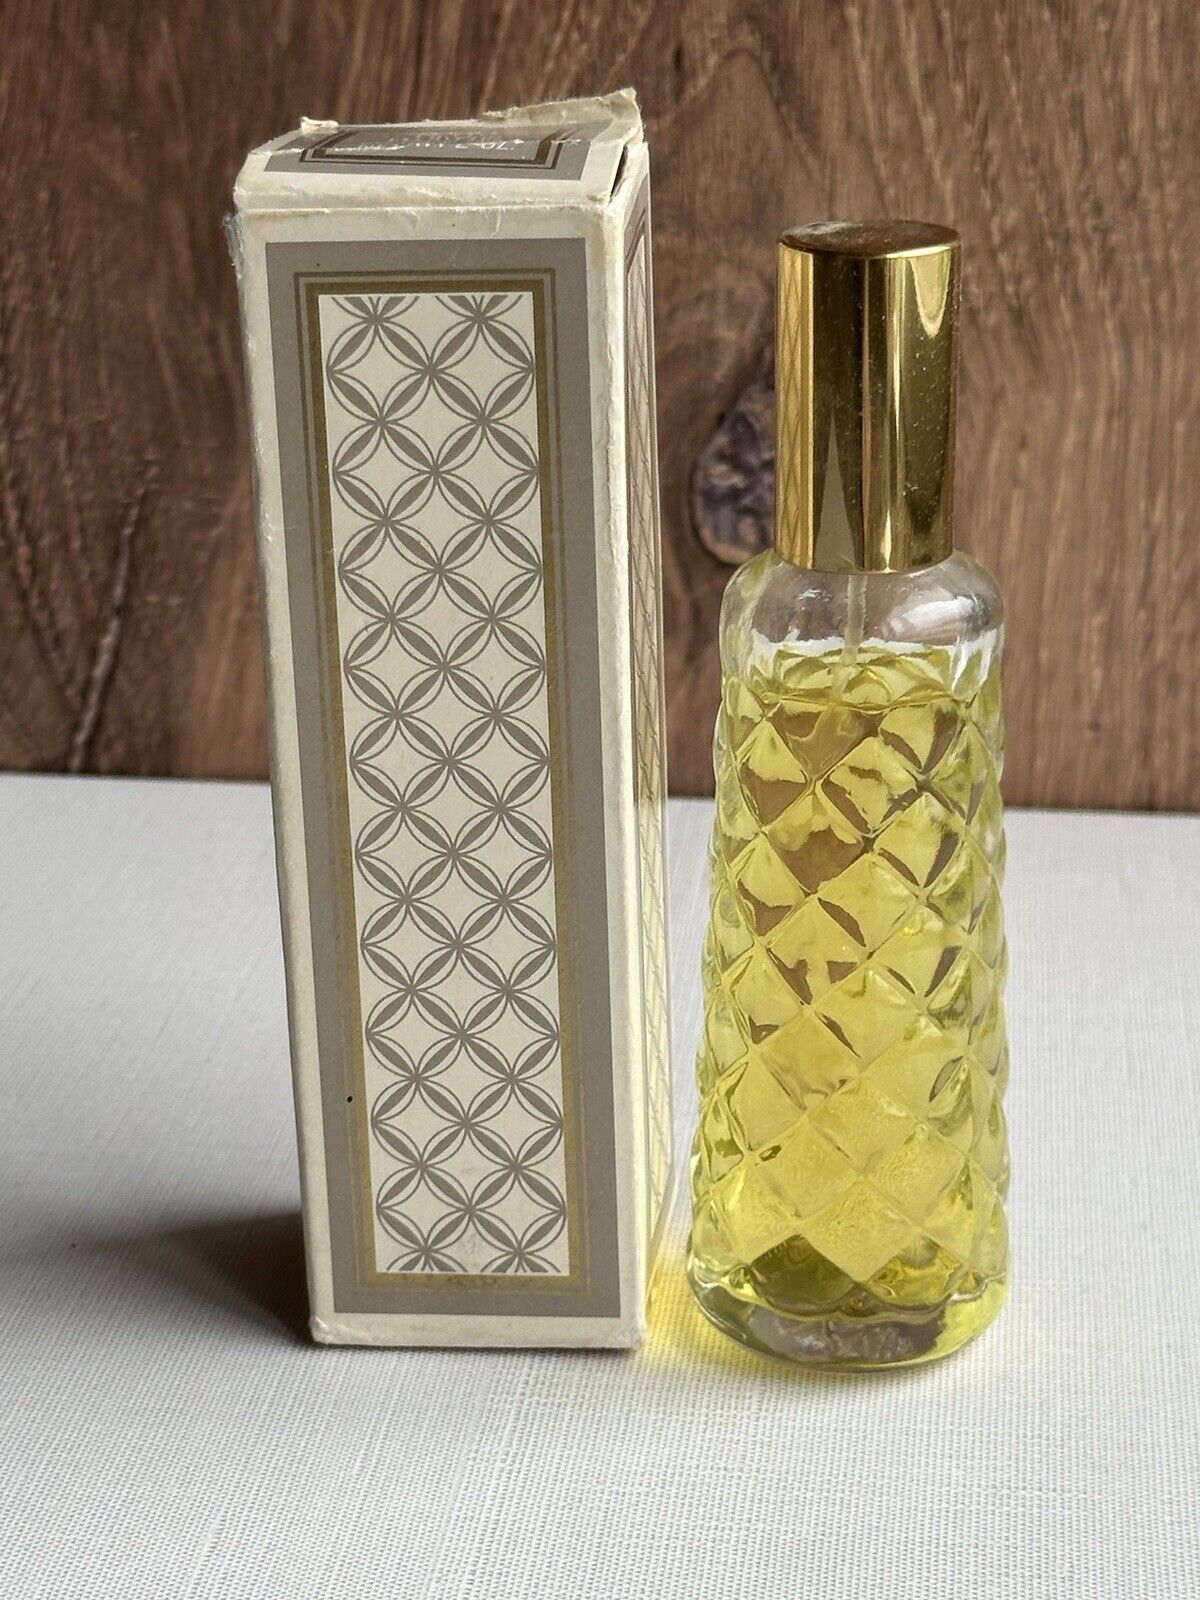 Avon Field Flowers Cologne Mist 2 Oz. Discontinued Appr 90% Full